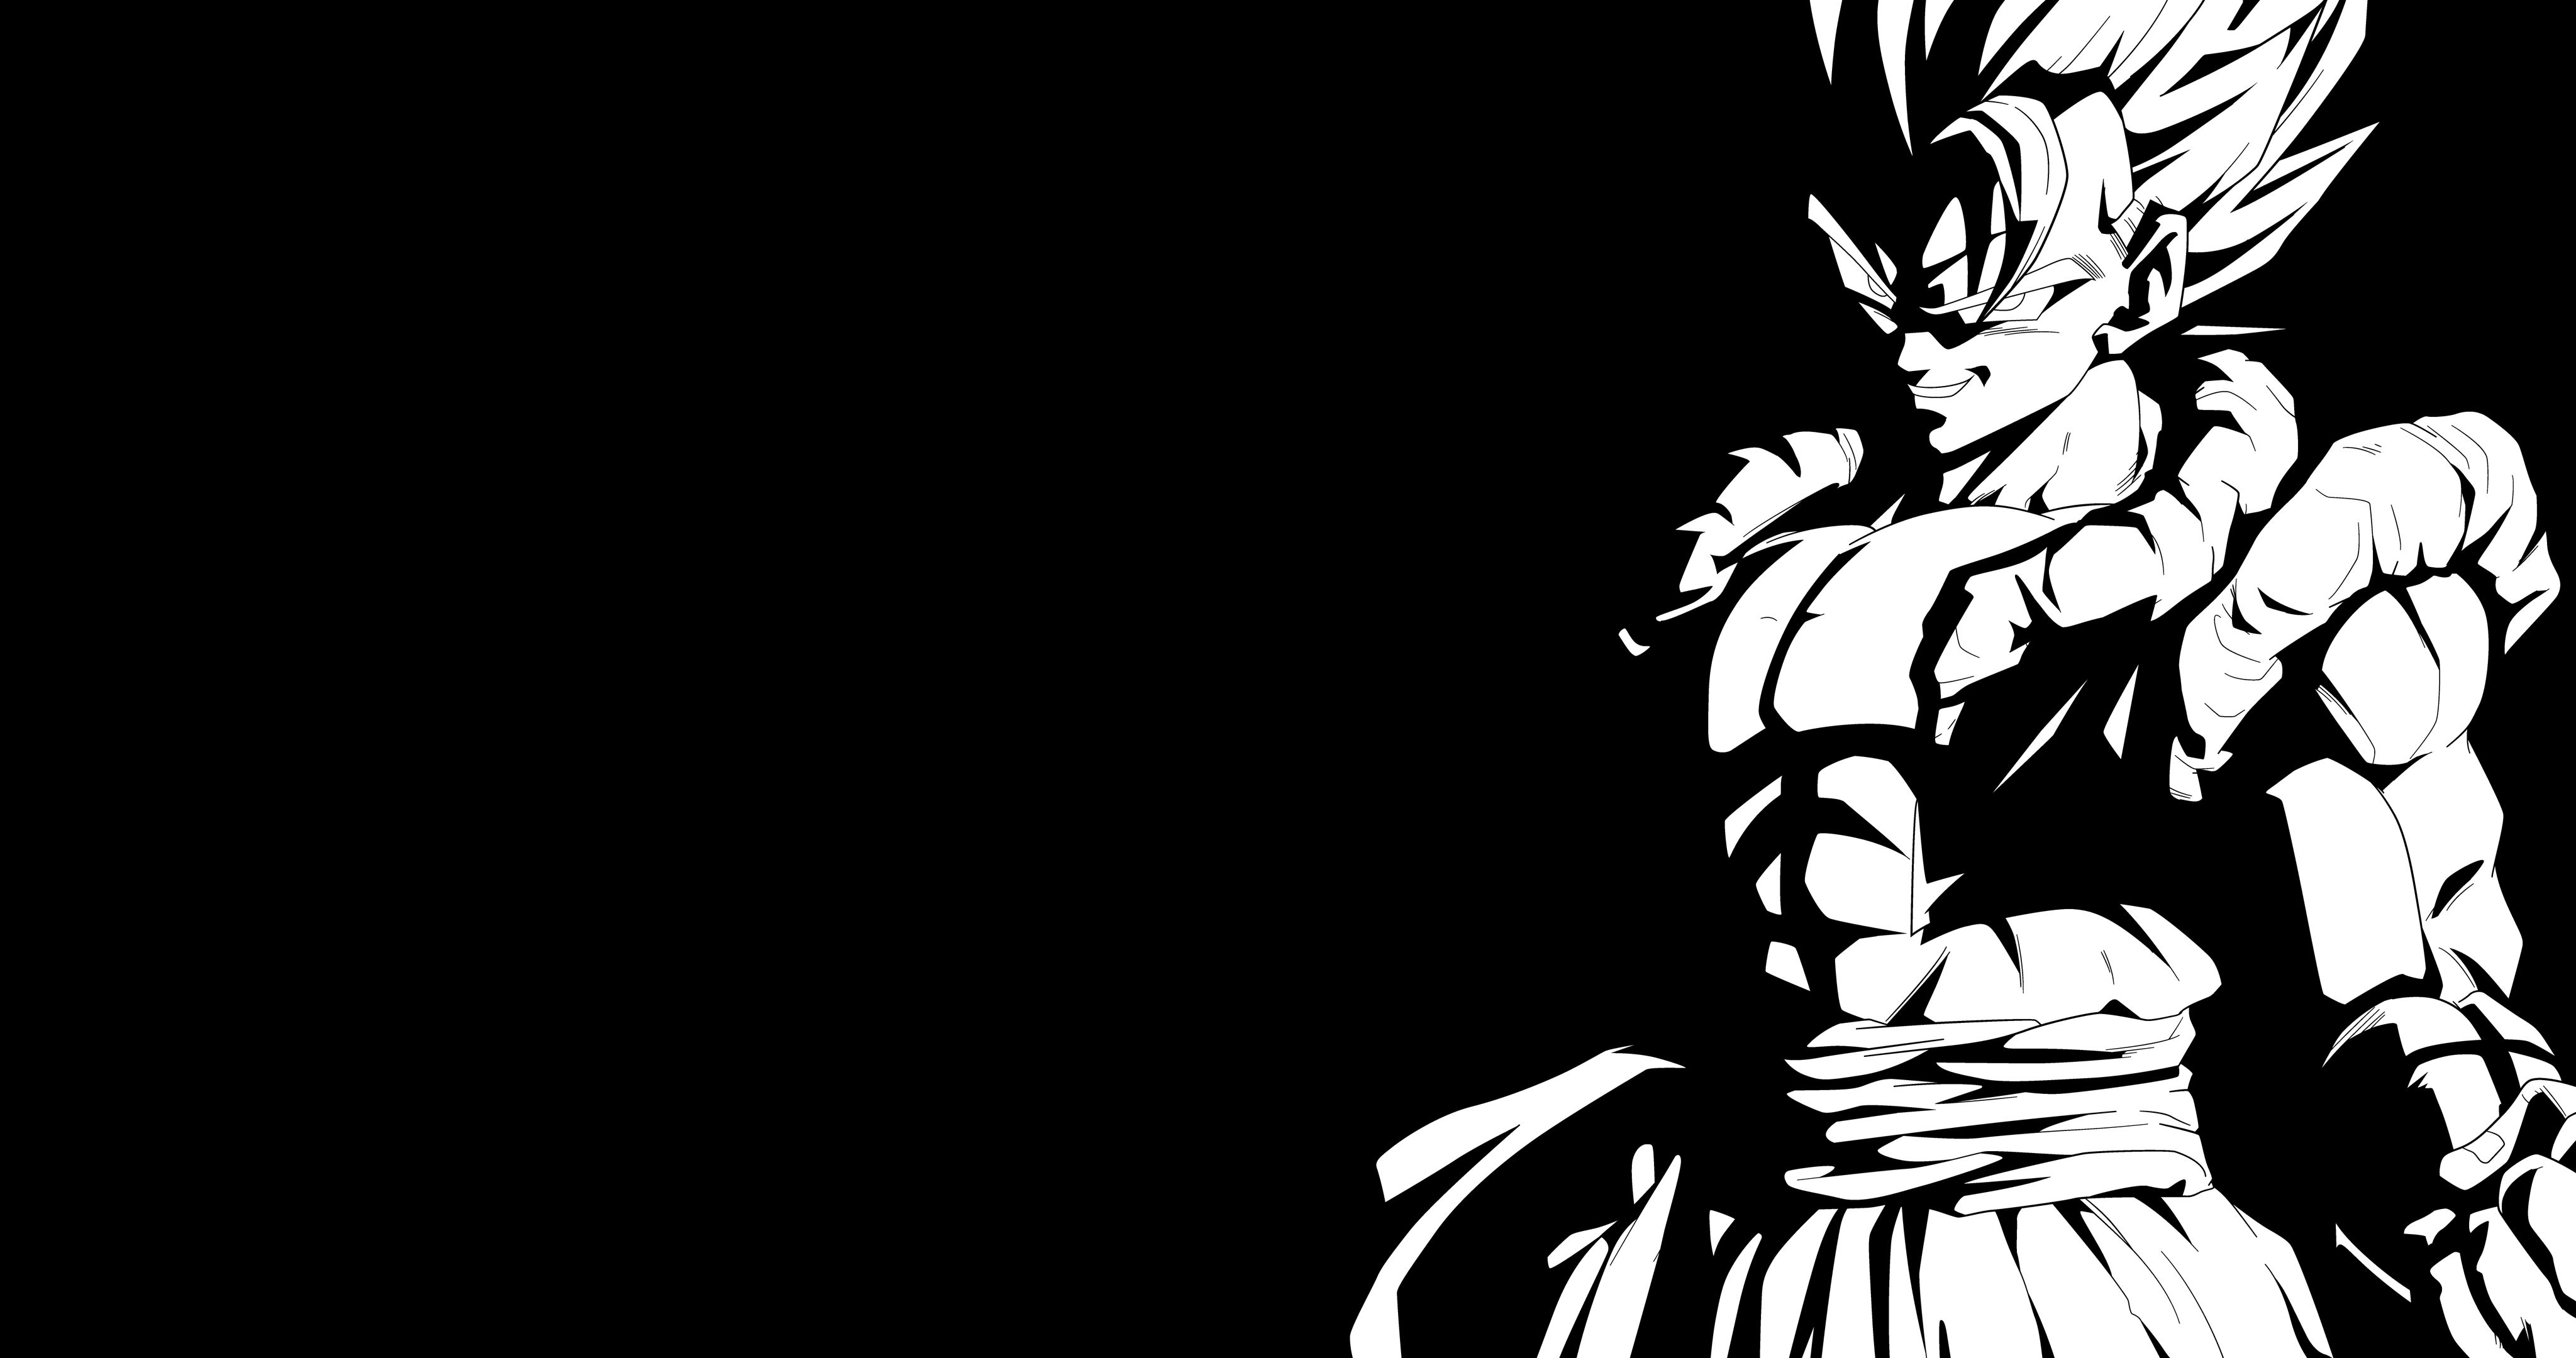 Free download Super Gogeta Black and White 4K Wallpaper by RayzorBlade189 on [4096x2160] for your Desktop, Mobile & Tablet. Explore 4K Black and White Wallpaper. Black And White HD